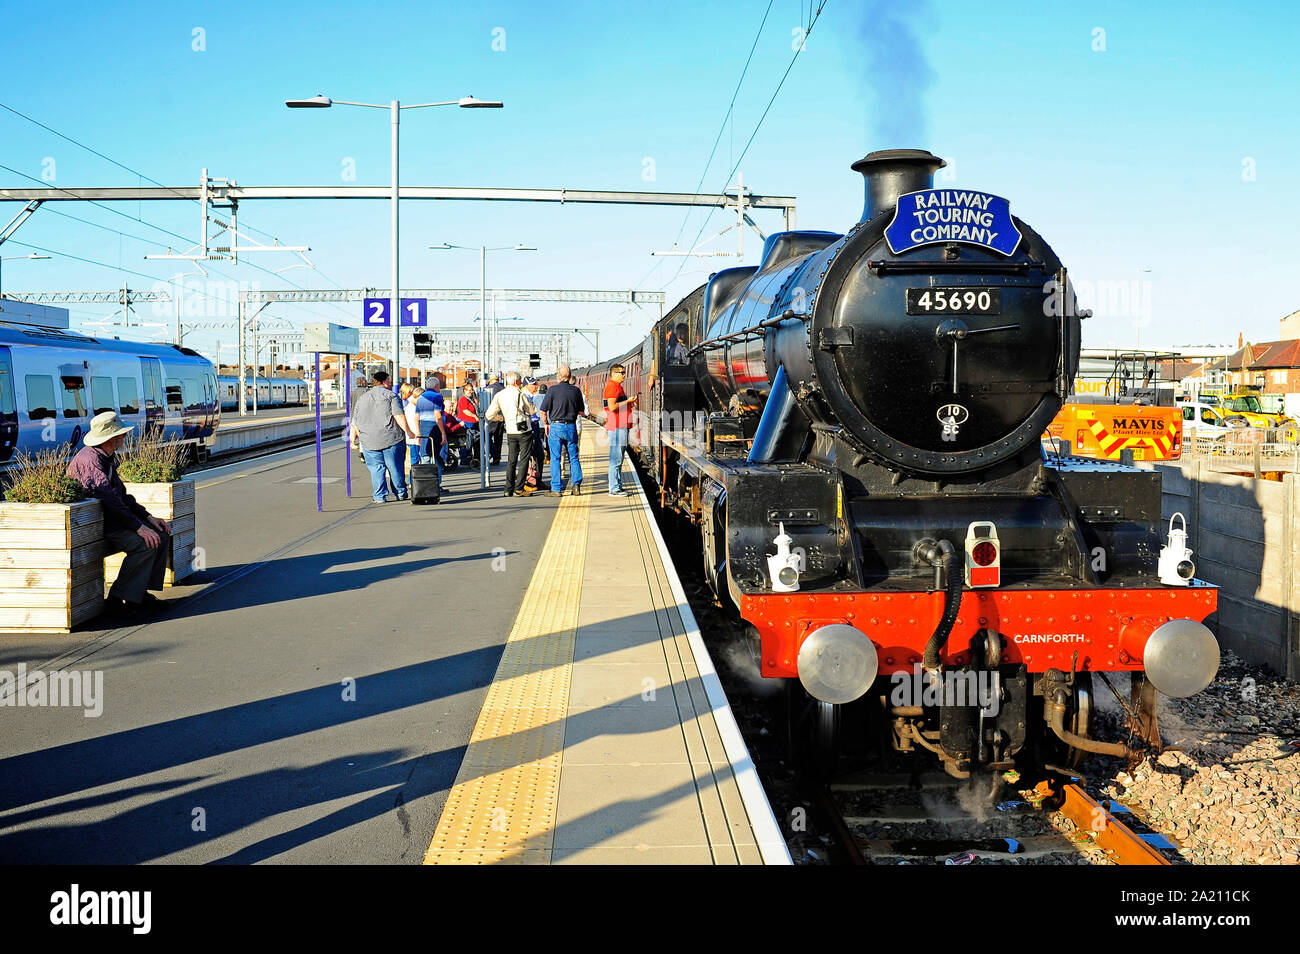 The steam train Leander(built 1936) on platform one of Blackpool North railway station Stock Photo